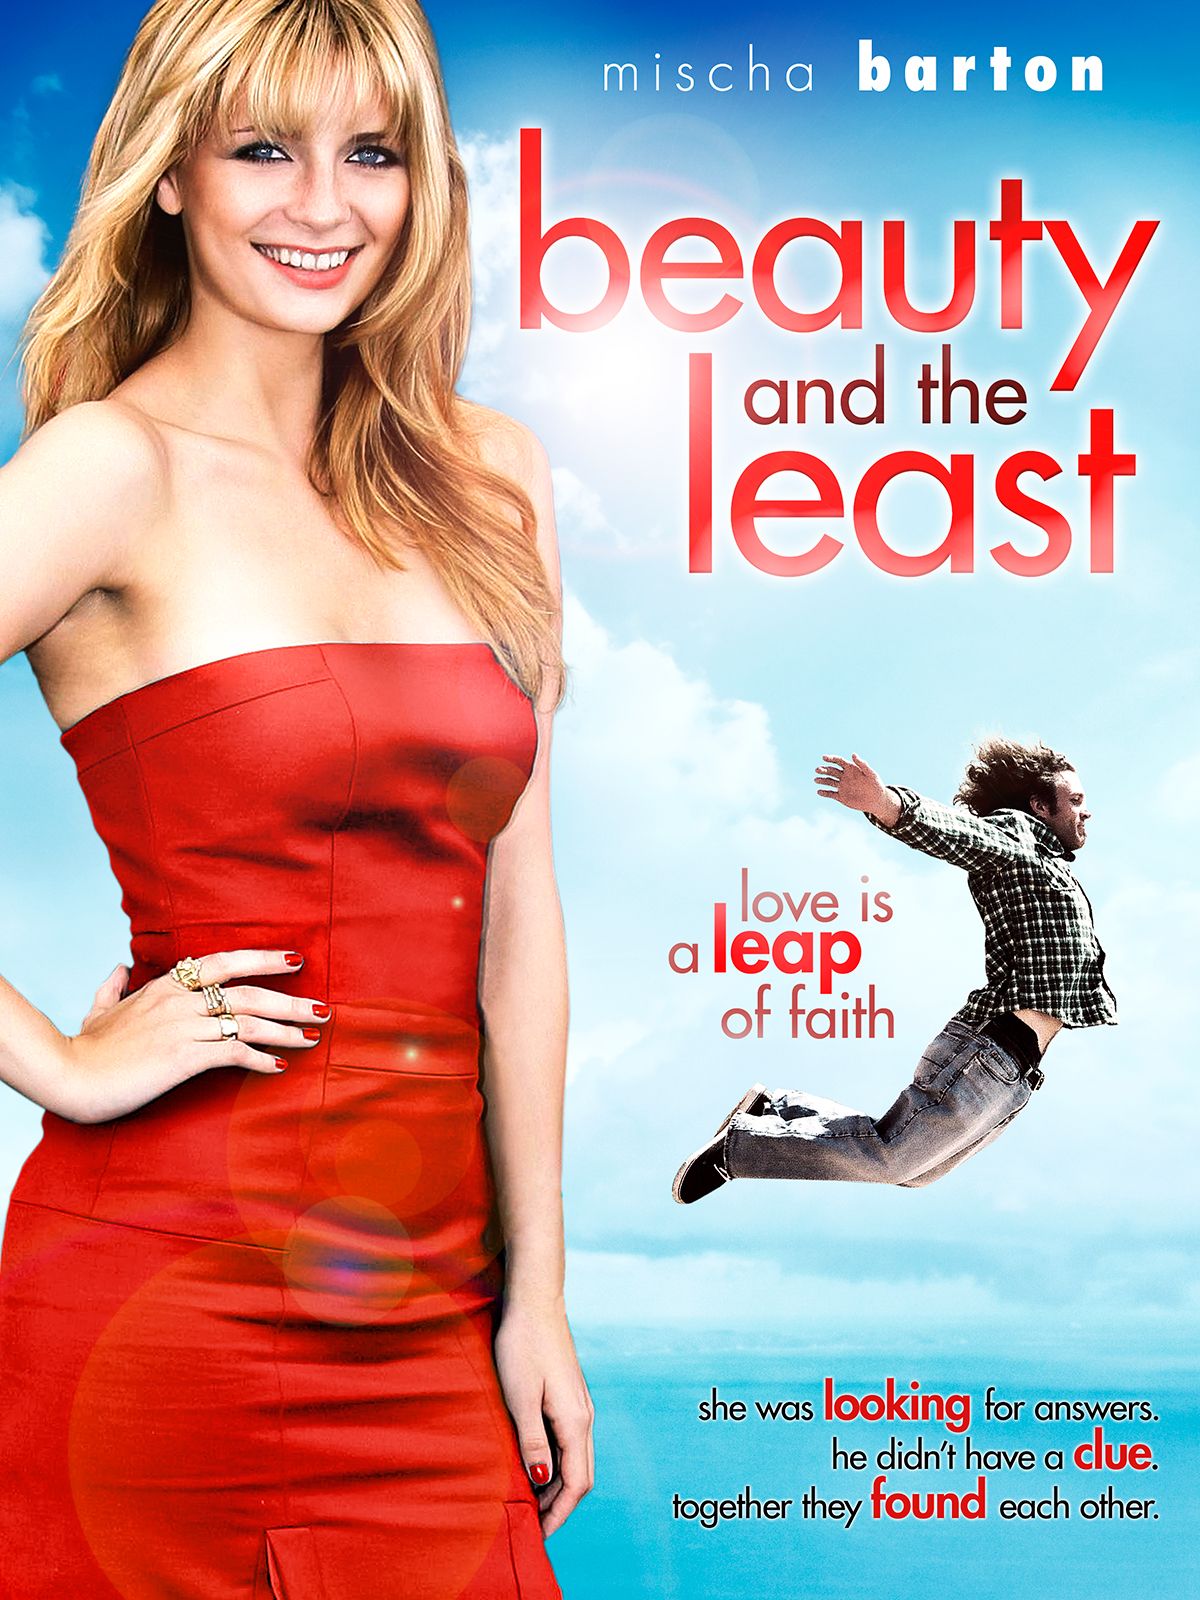 Keyart for the movie Beauty and the Least